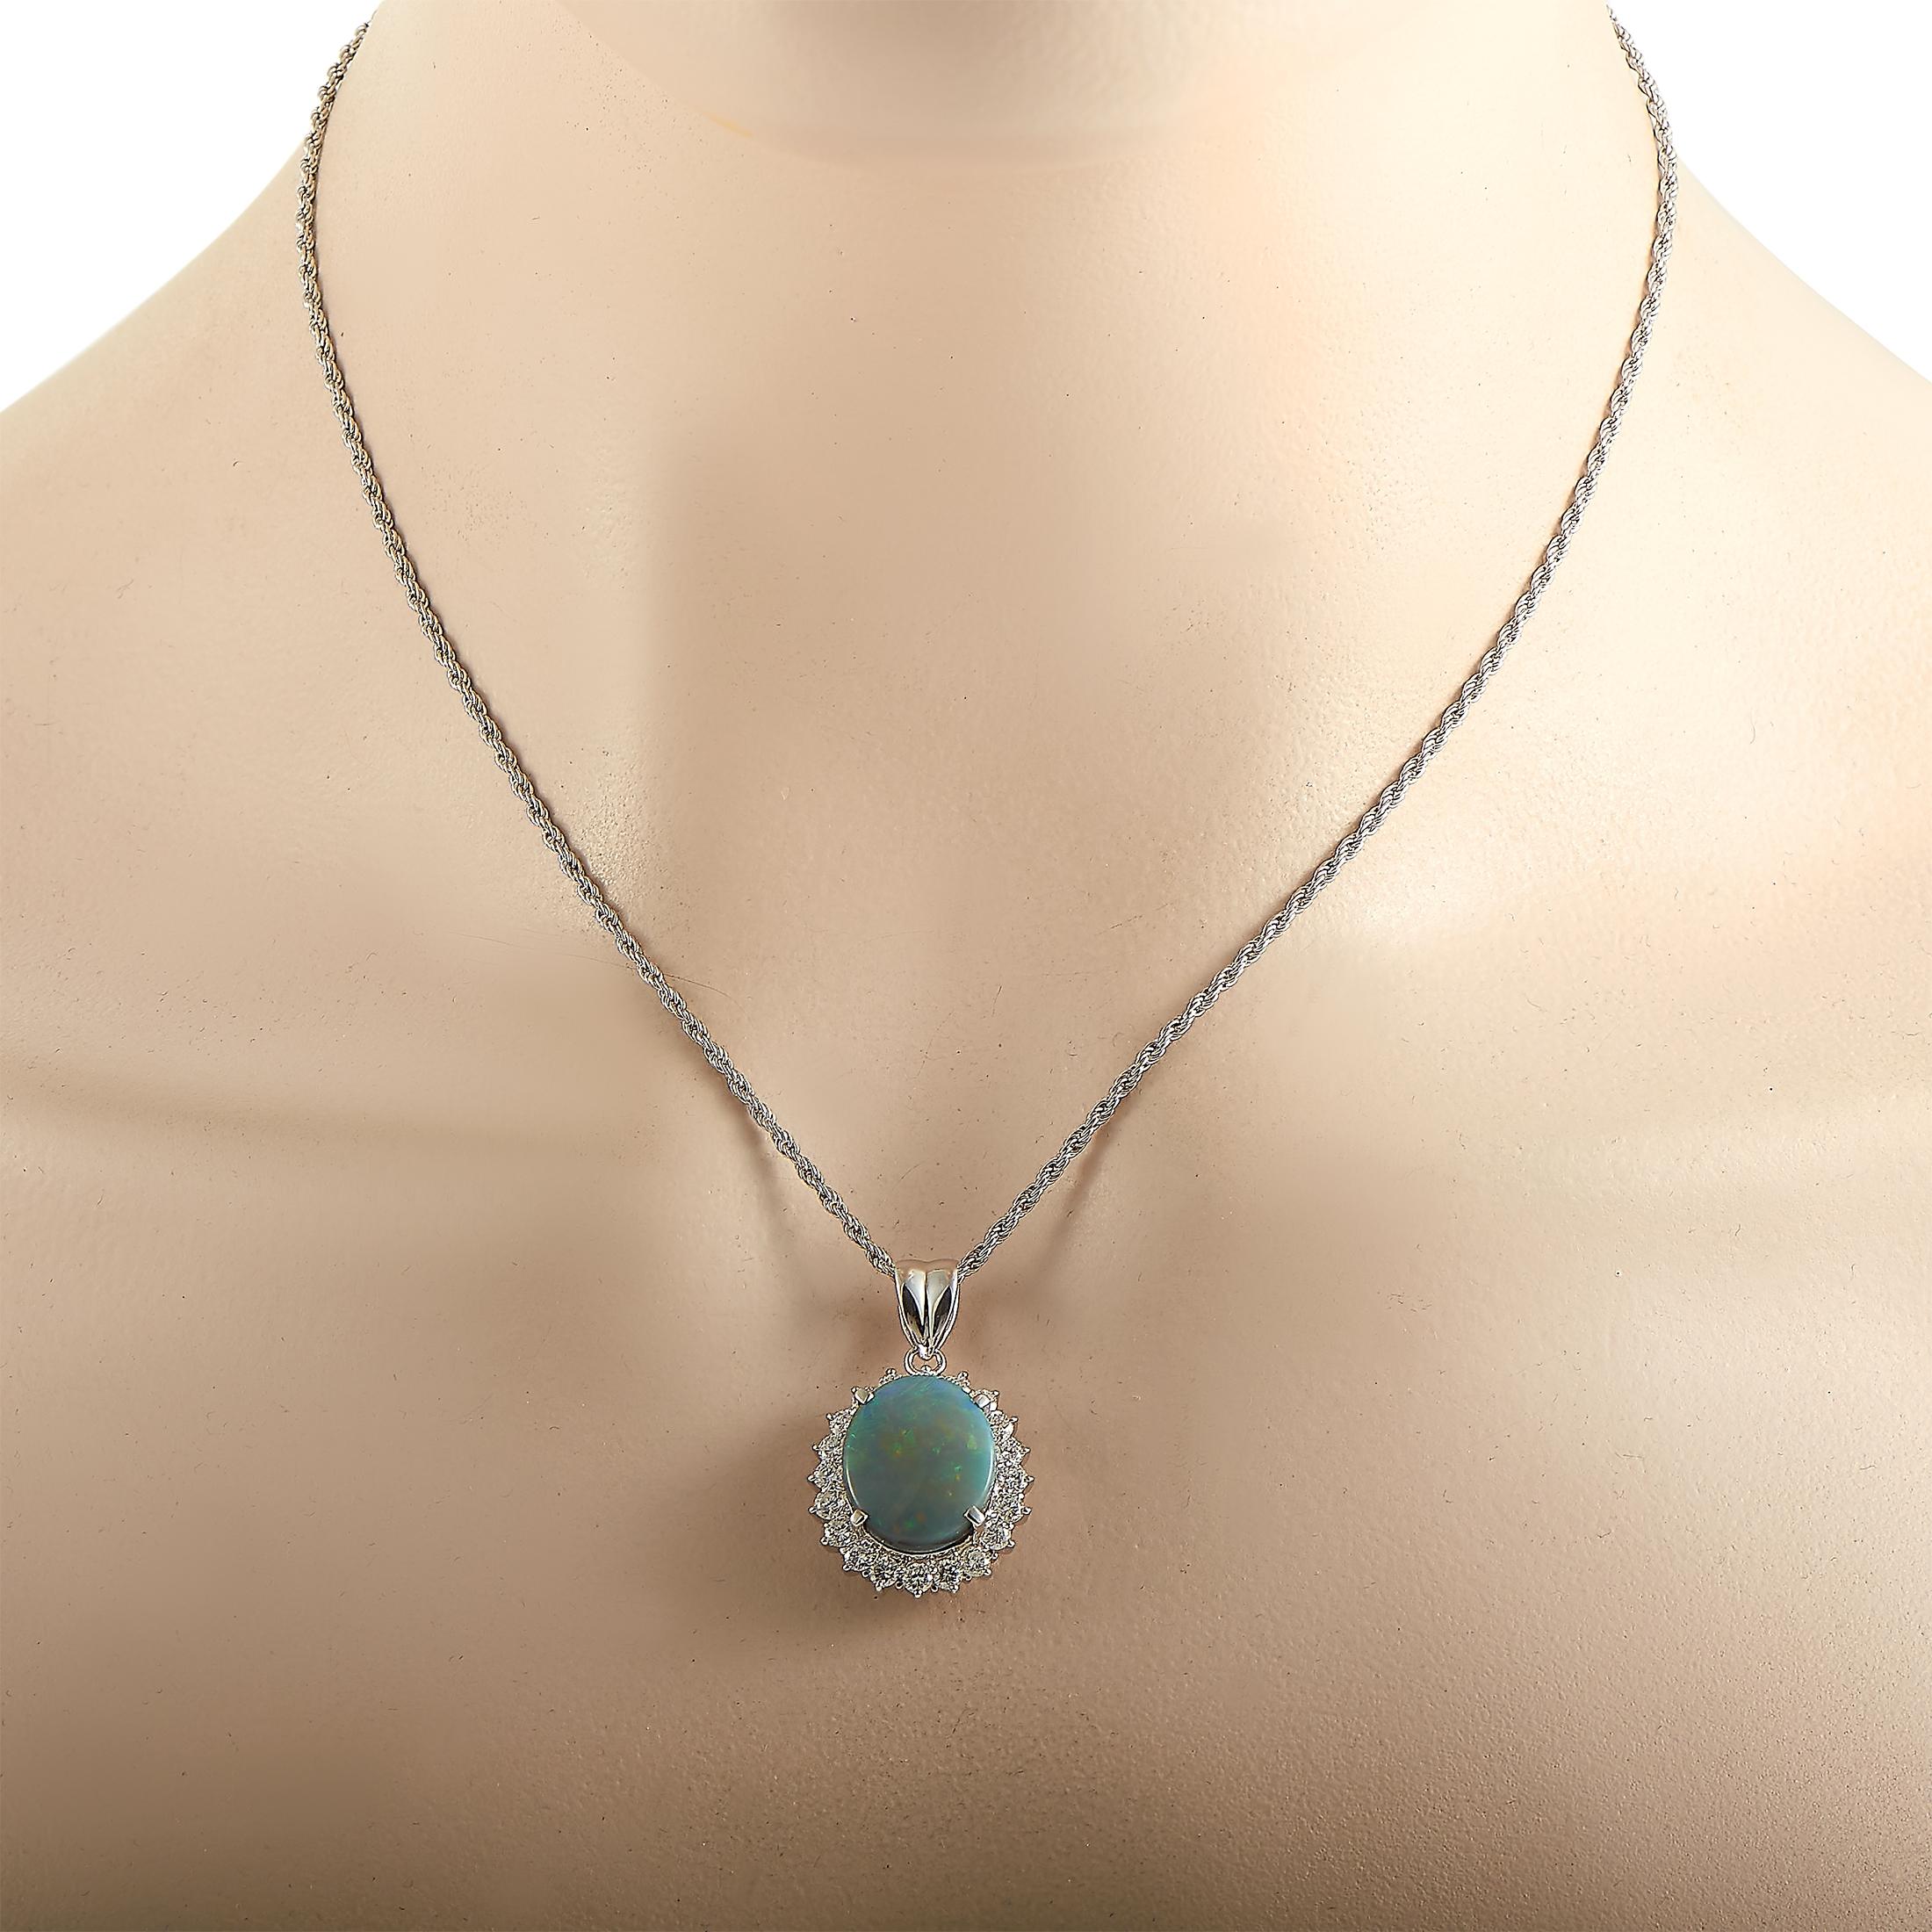 This LB Exclusive necklace is crafted from platinum and weighs 16.8 grams. It is presented with a 16” chain and a pendant that measures 1.15” in length and 0.75” in width. The necklace is embellished with a 7.33 ct black opal and a total of 1.34